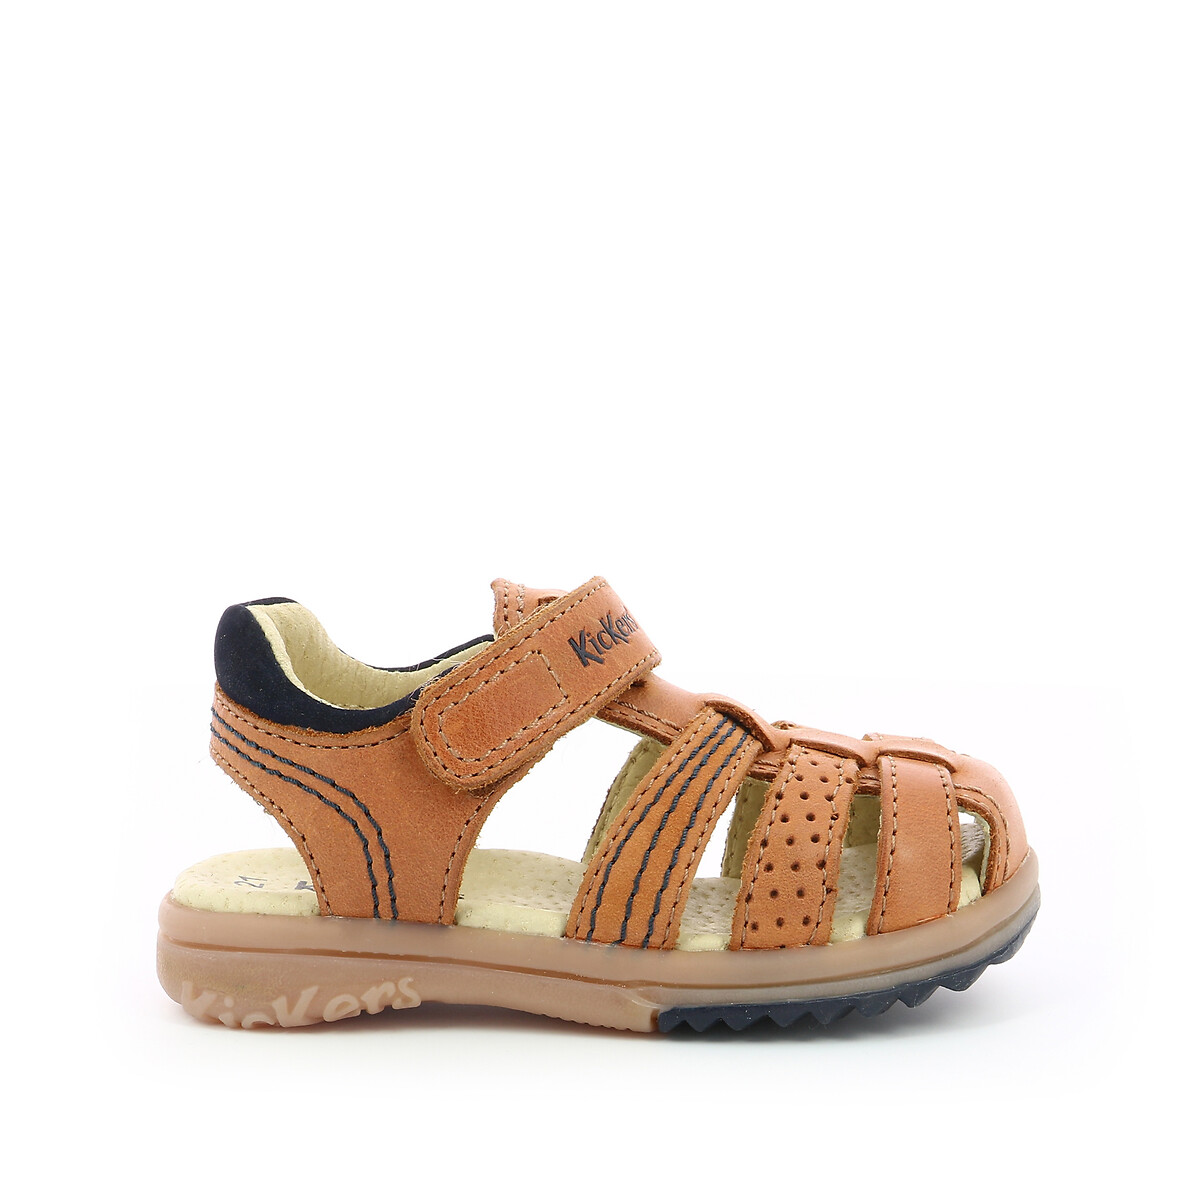 Image of Kids Platinium Leather Sandals with Touch 'n' Close Fastening